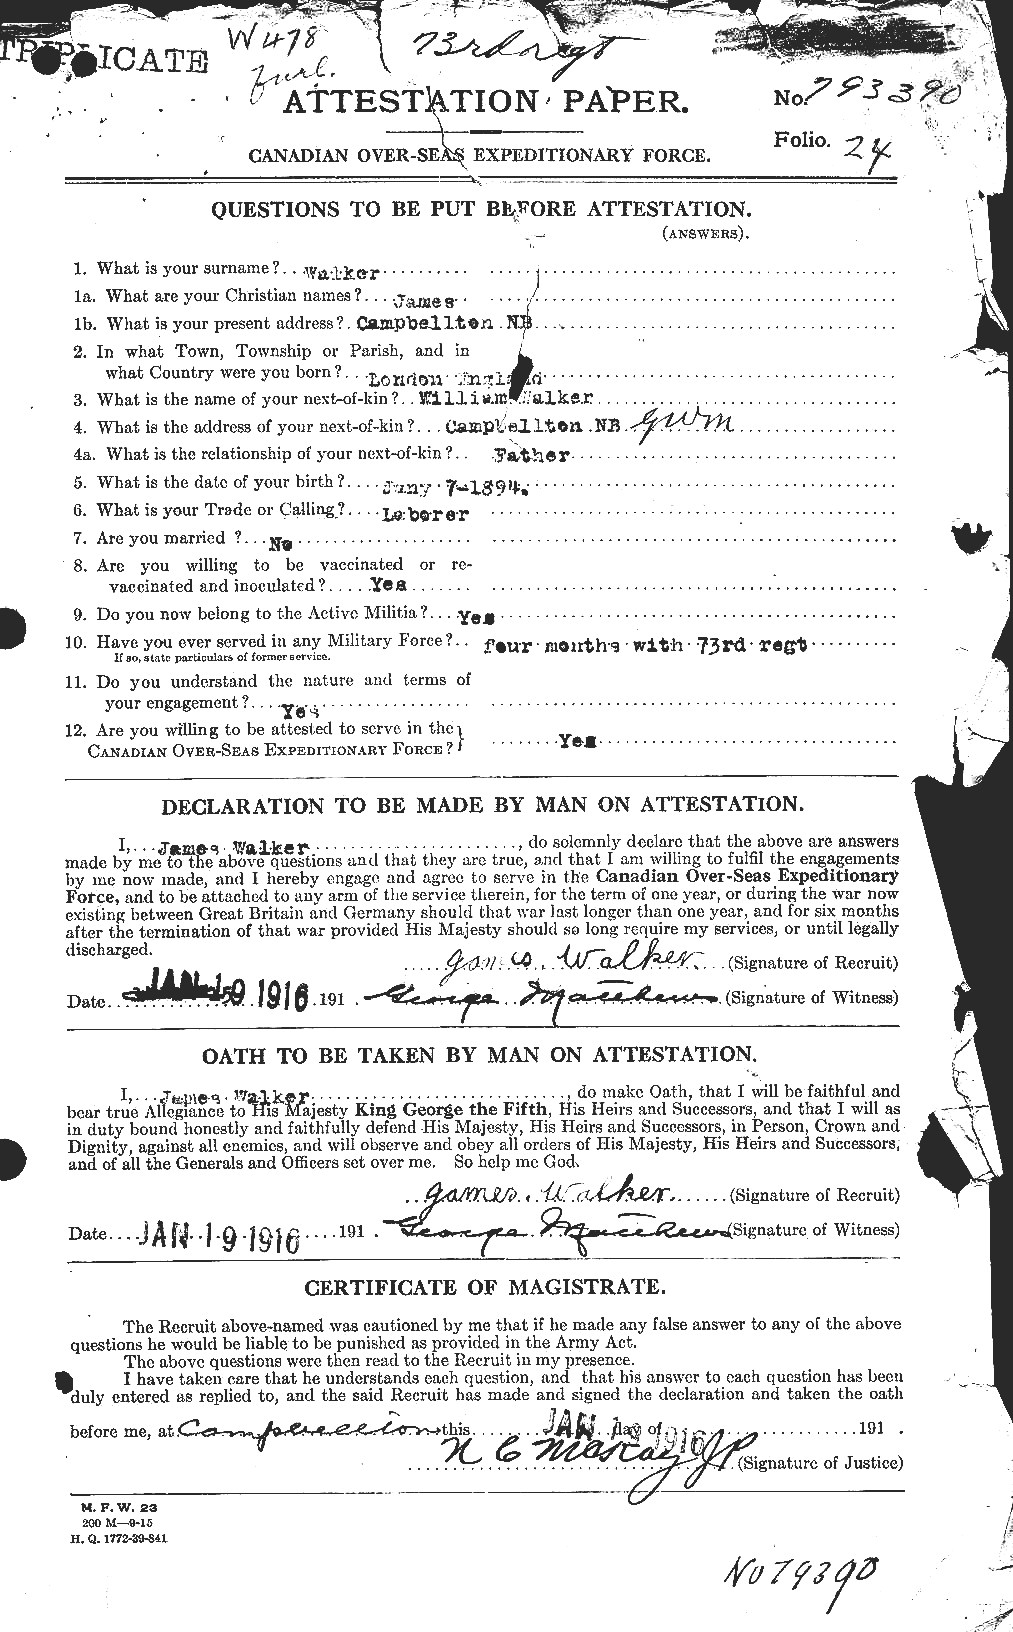 Personnel Records of the First World War - CEF 652947a